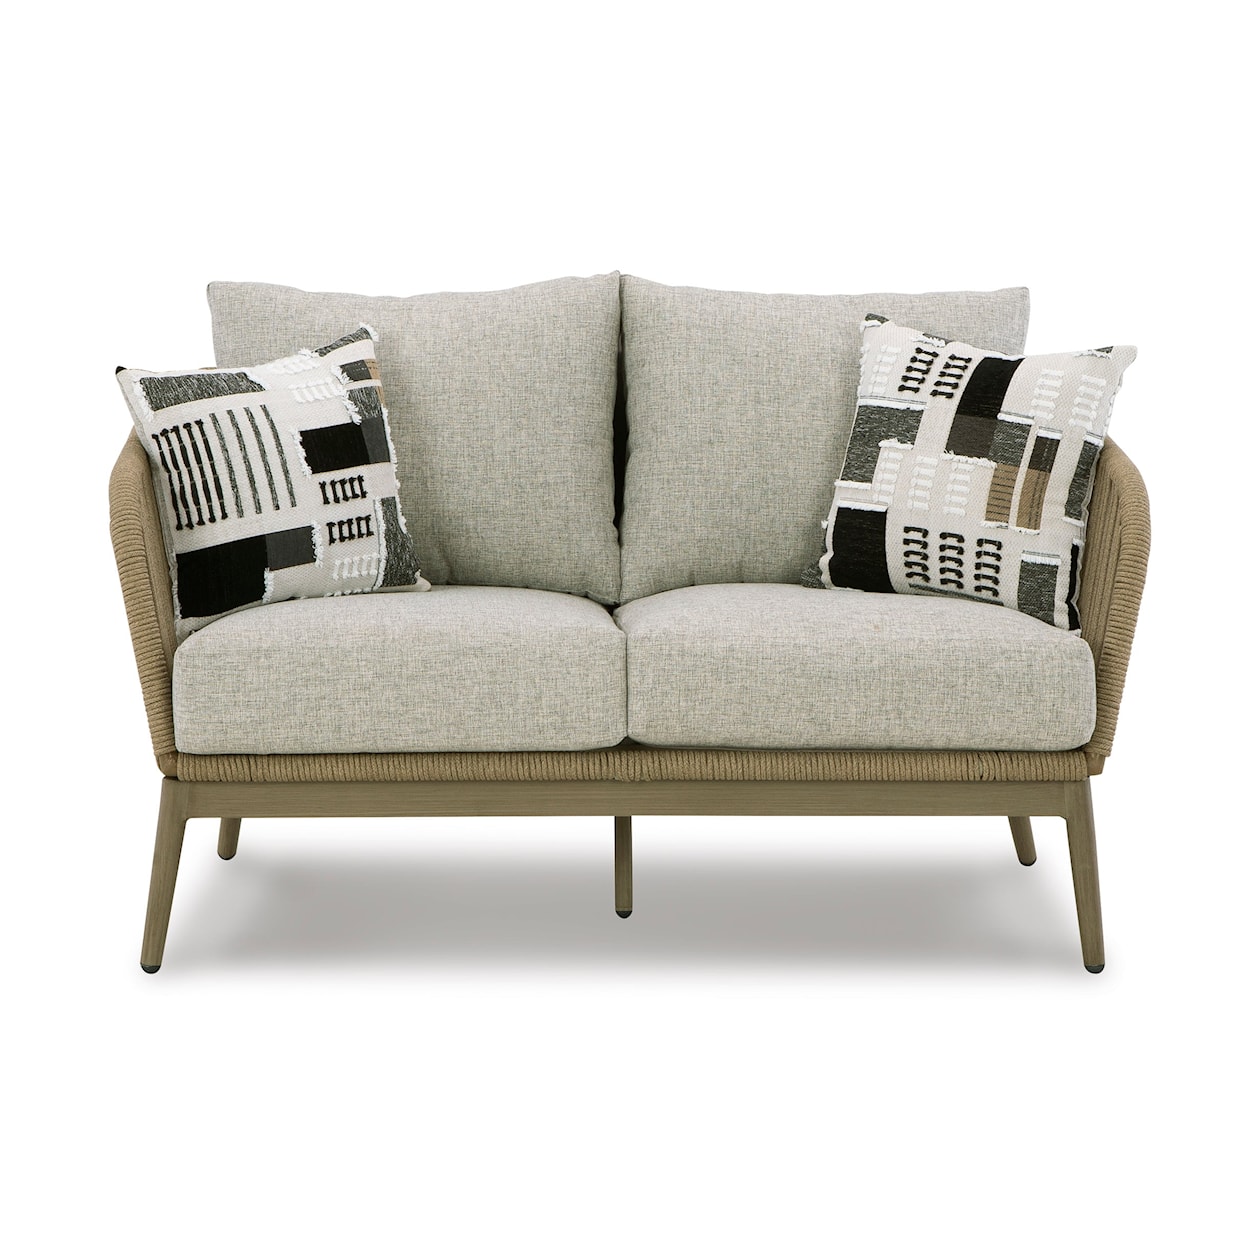 Signature Design by Ashley Swiss Valley Outdoor Loveseat